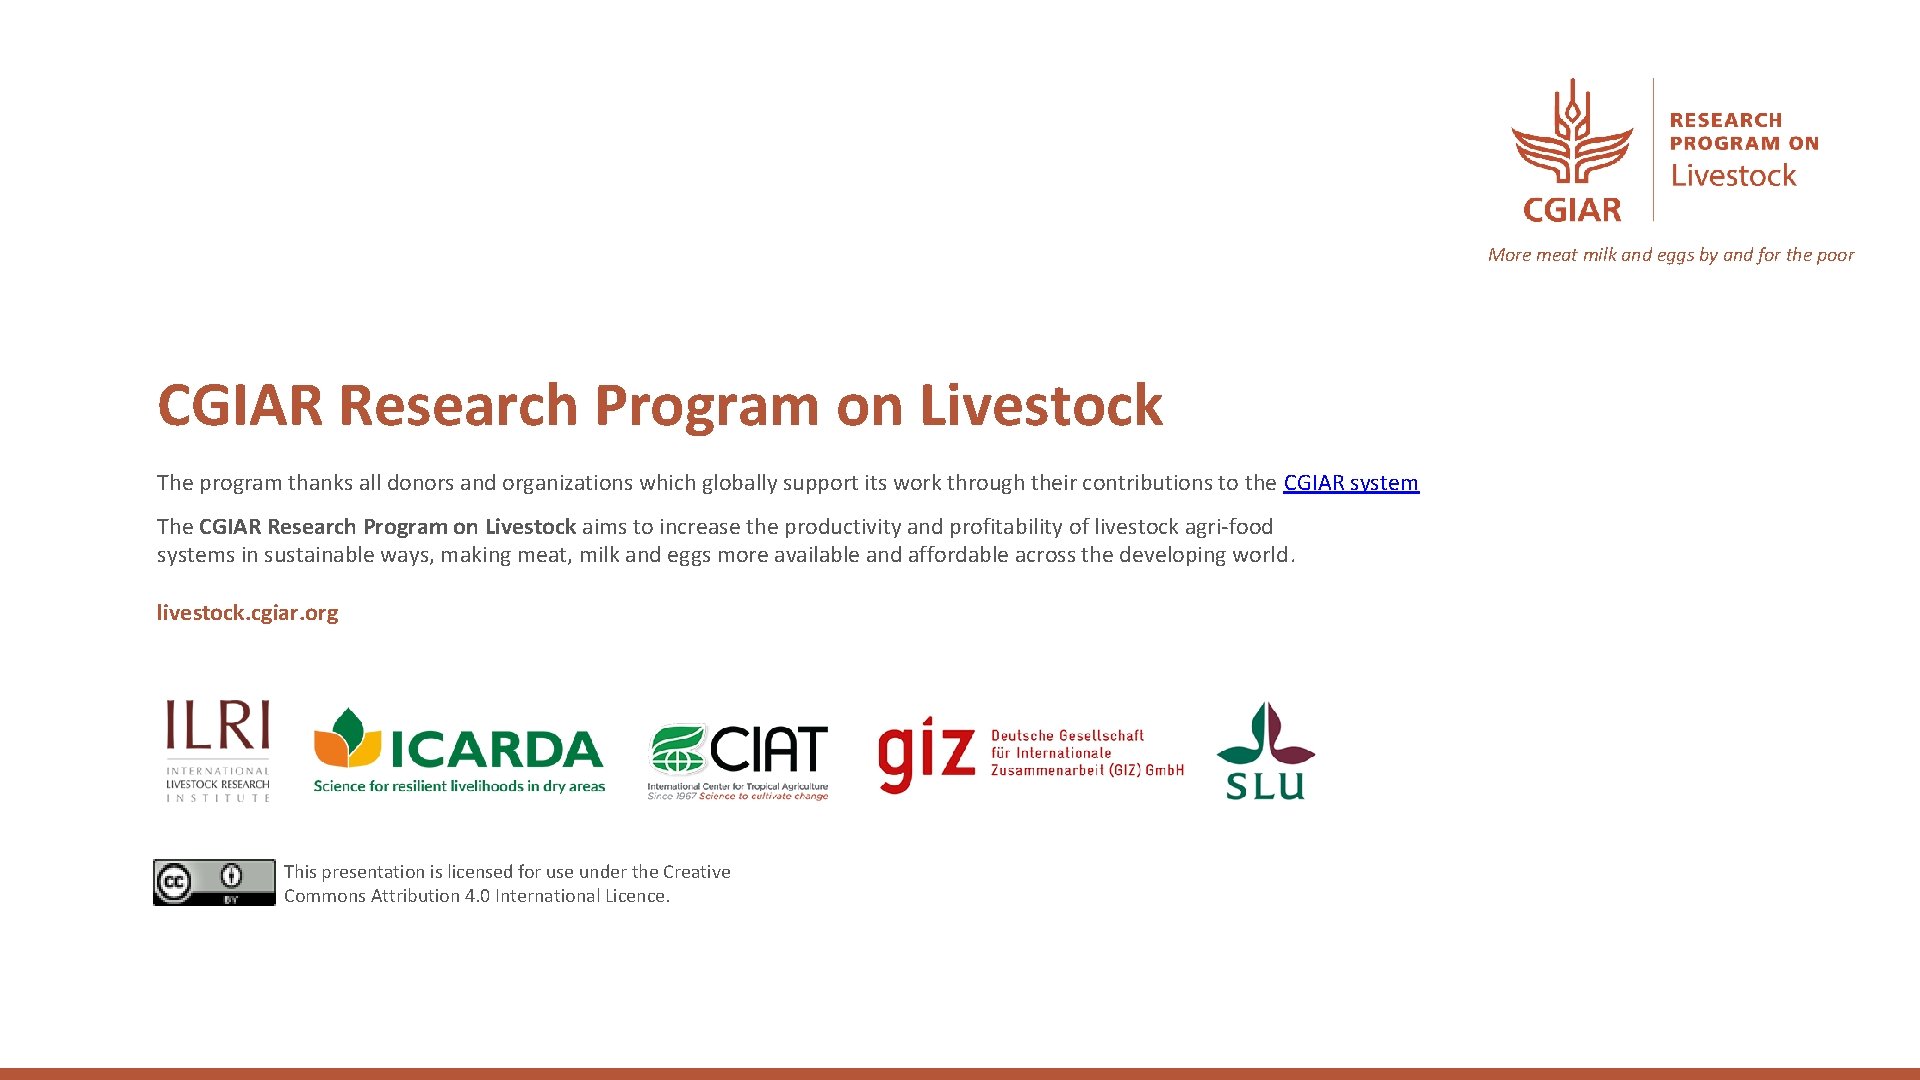 More meat milk and eggs by and for the poor CGIAR Research Program on